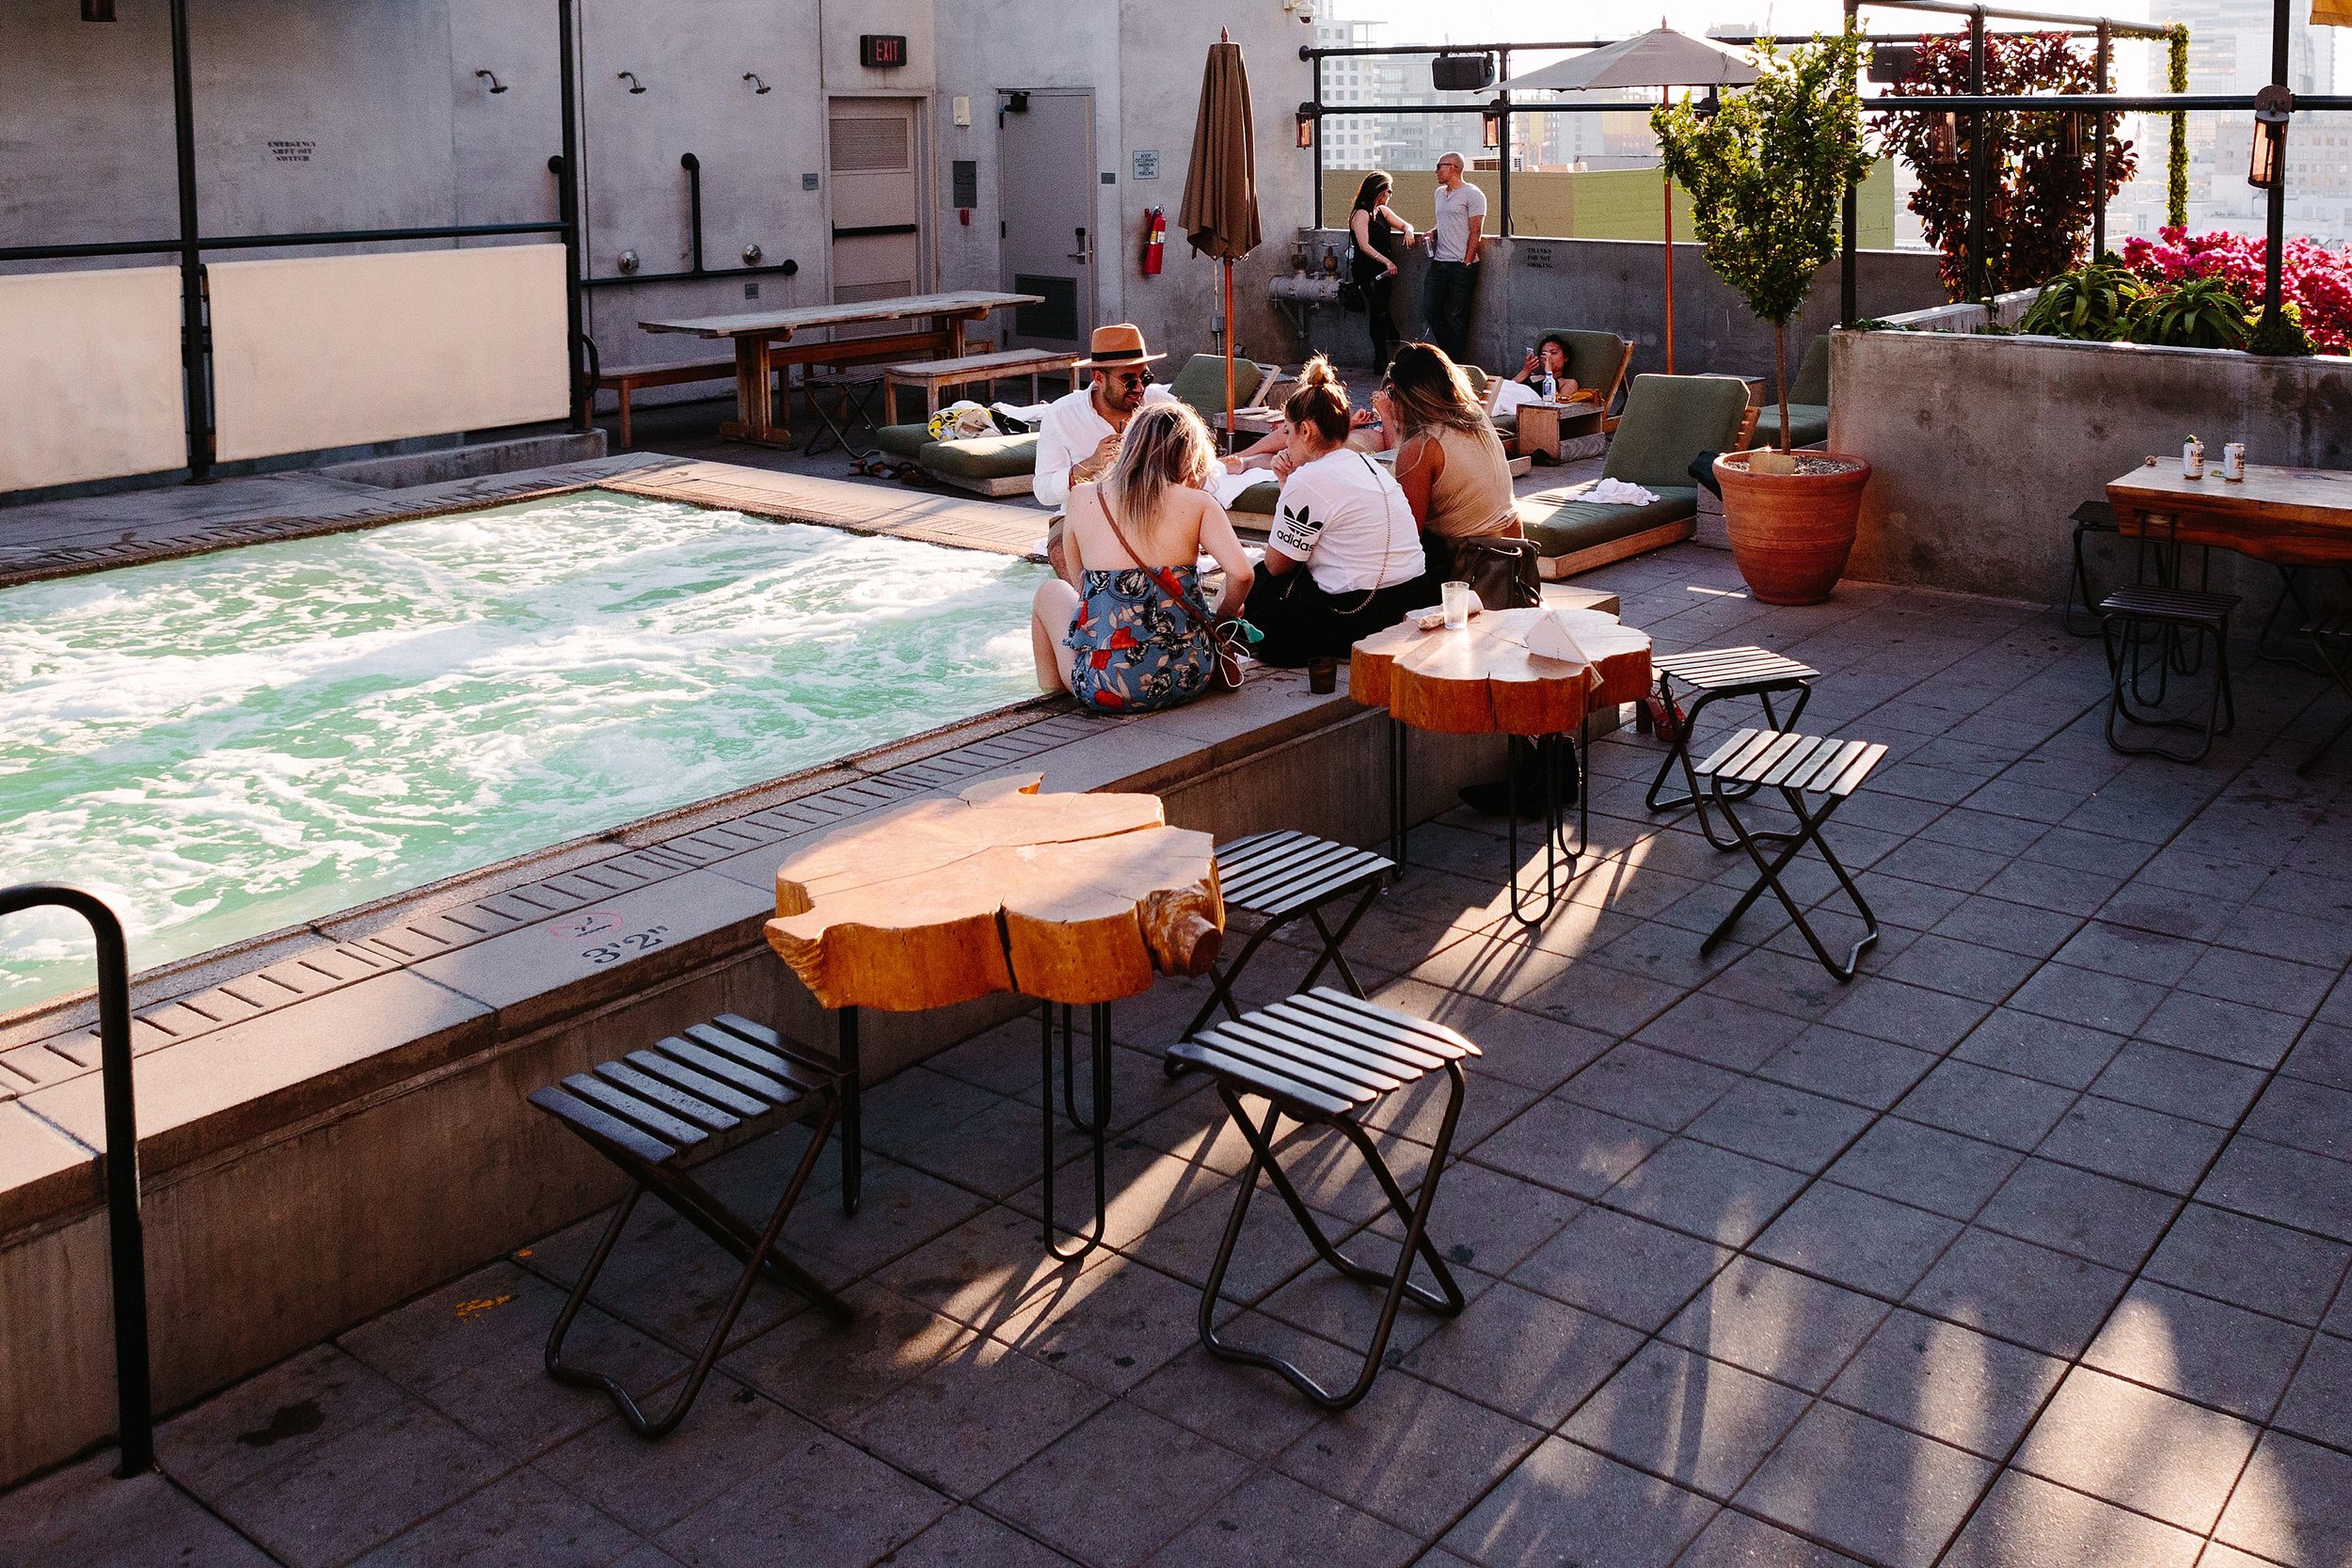  Poolside at the Upstairs bar at the Ace Hotel in downtown Los Angeles. 